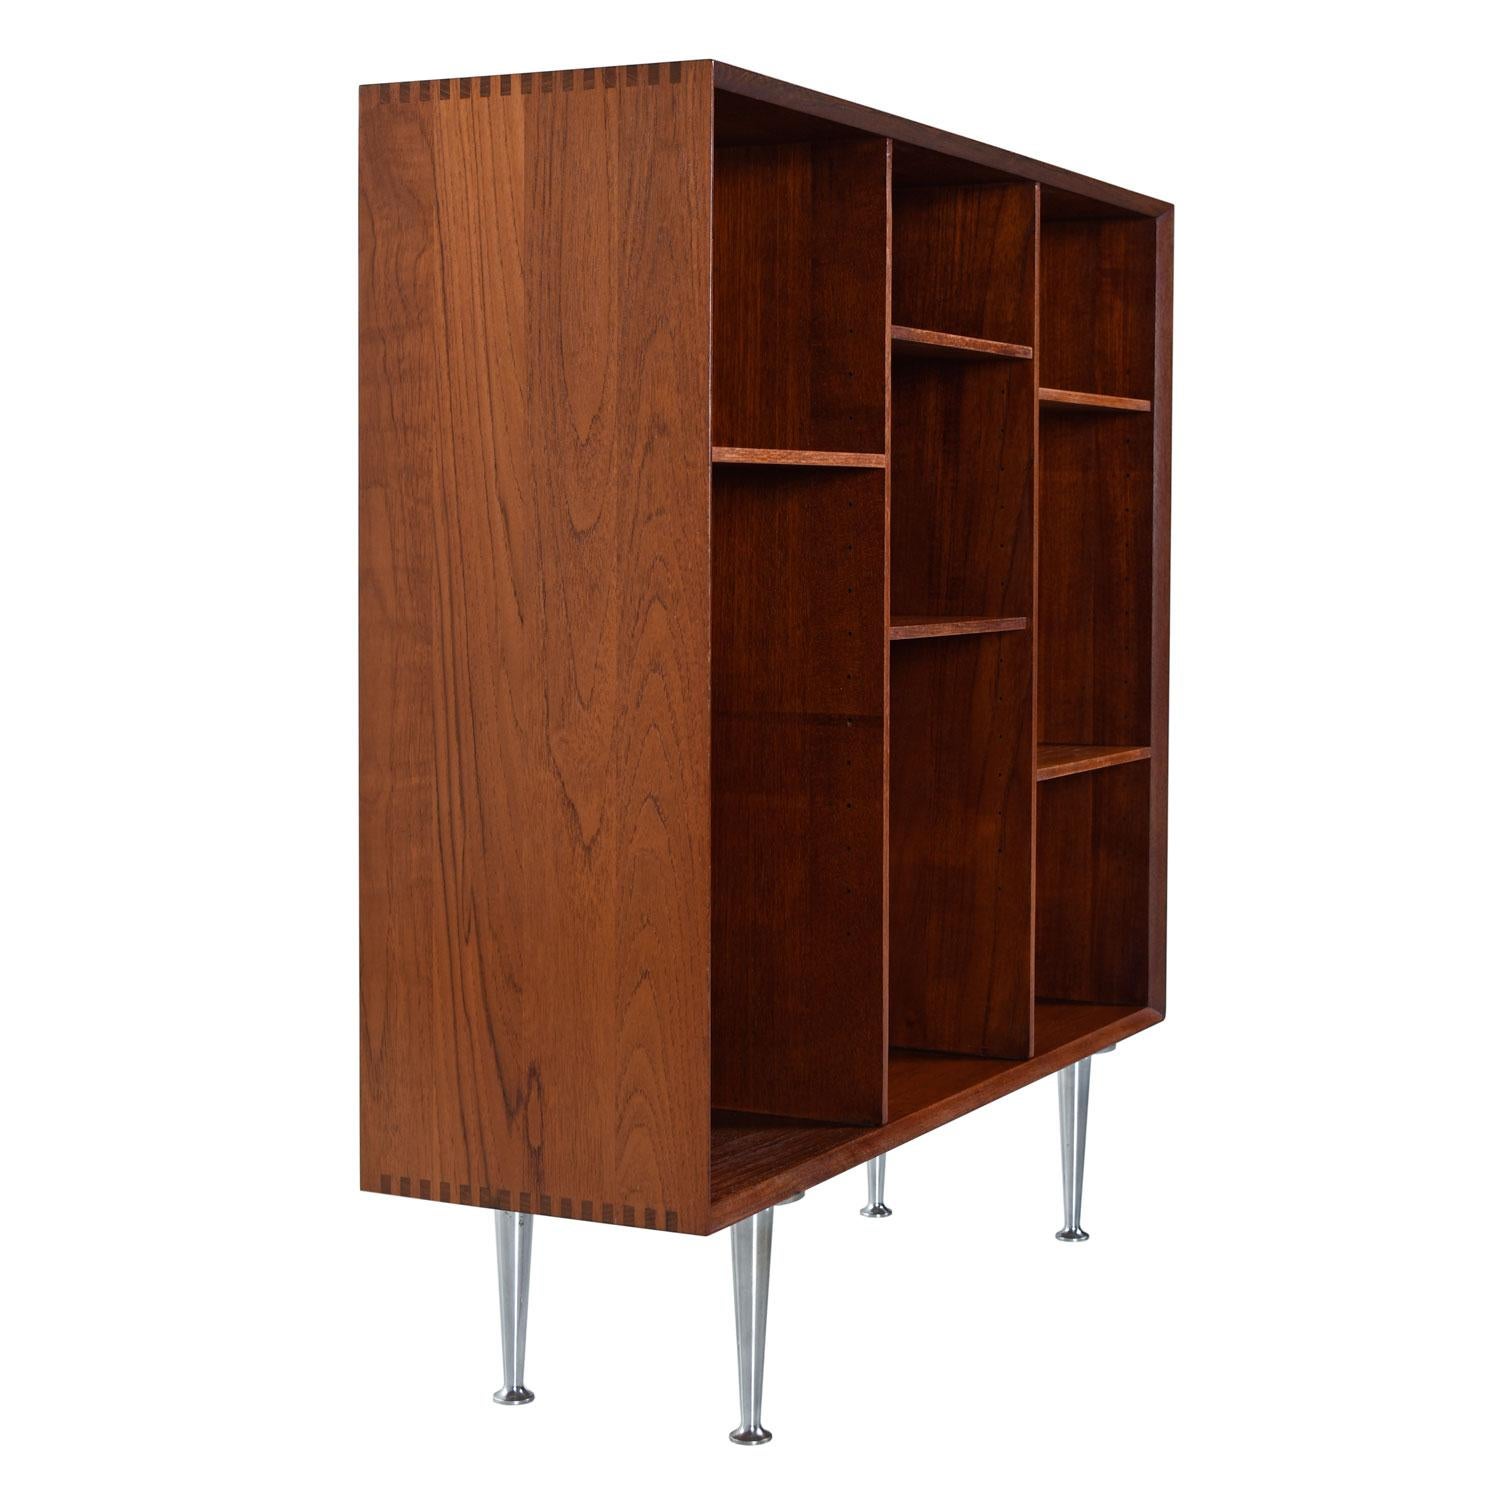 Designed by Peter Hvidt & Orla Mølgaard-Nielsen for John Stuart. True solid teak, no plywood or MDF (except for shelves and back panel). The finger joinery is clearly visible from a distance and adds to the overall charm while illustrating